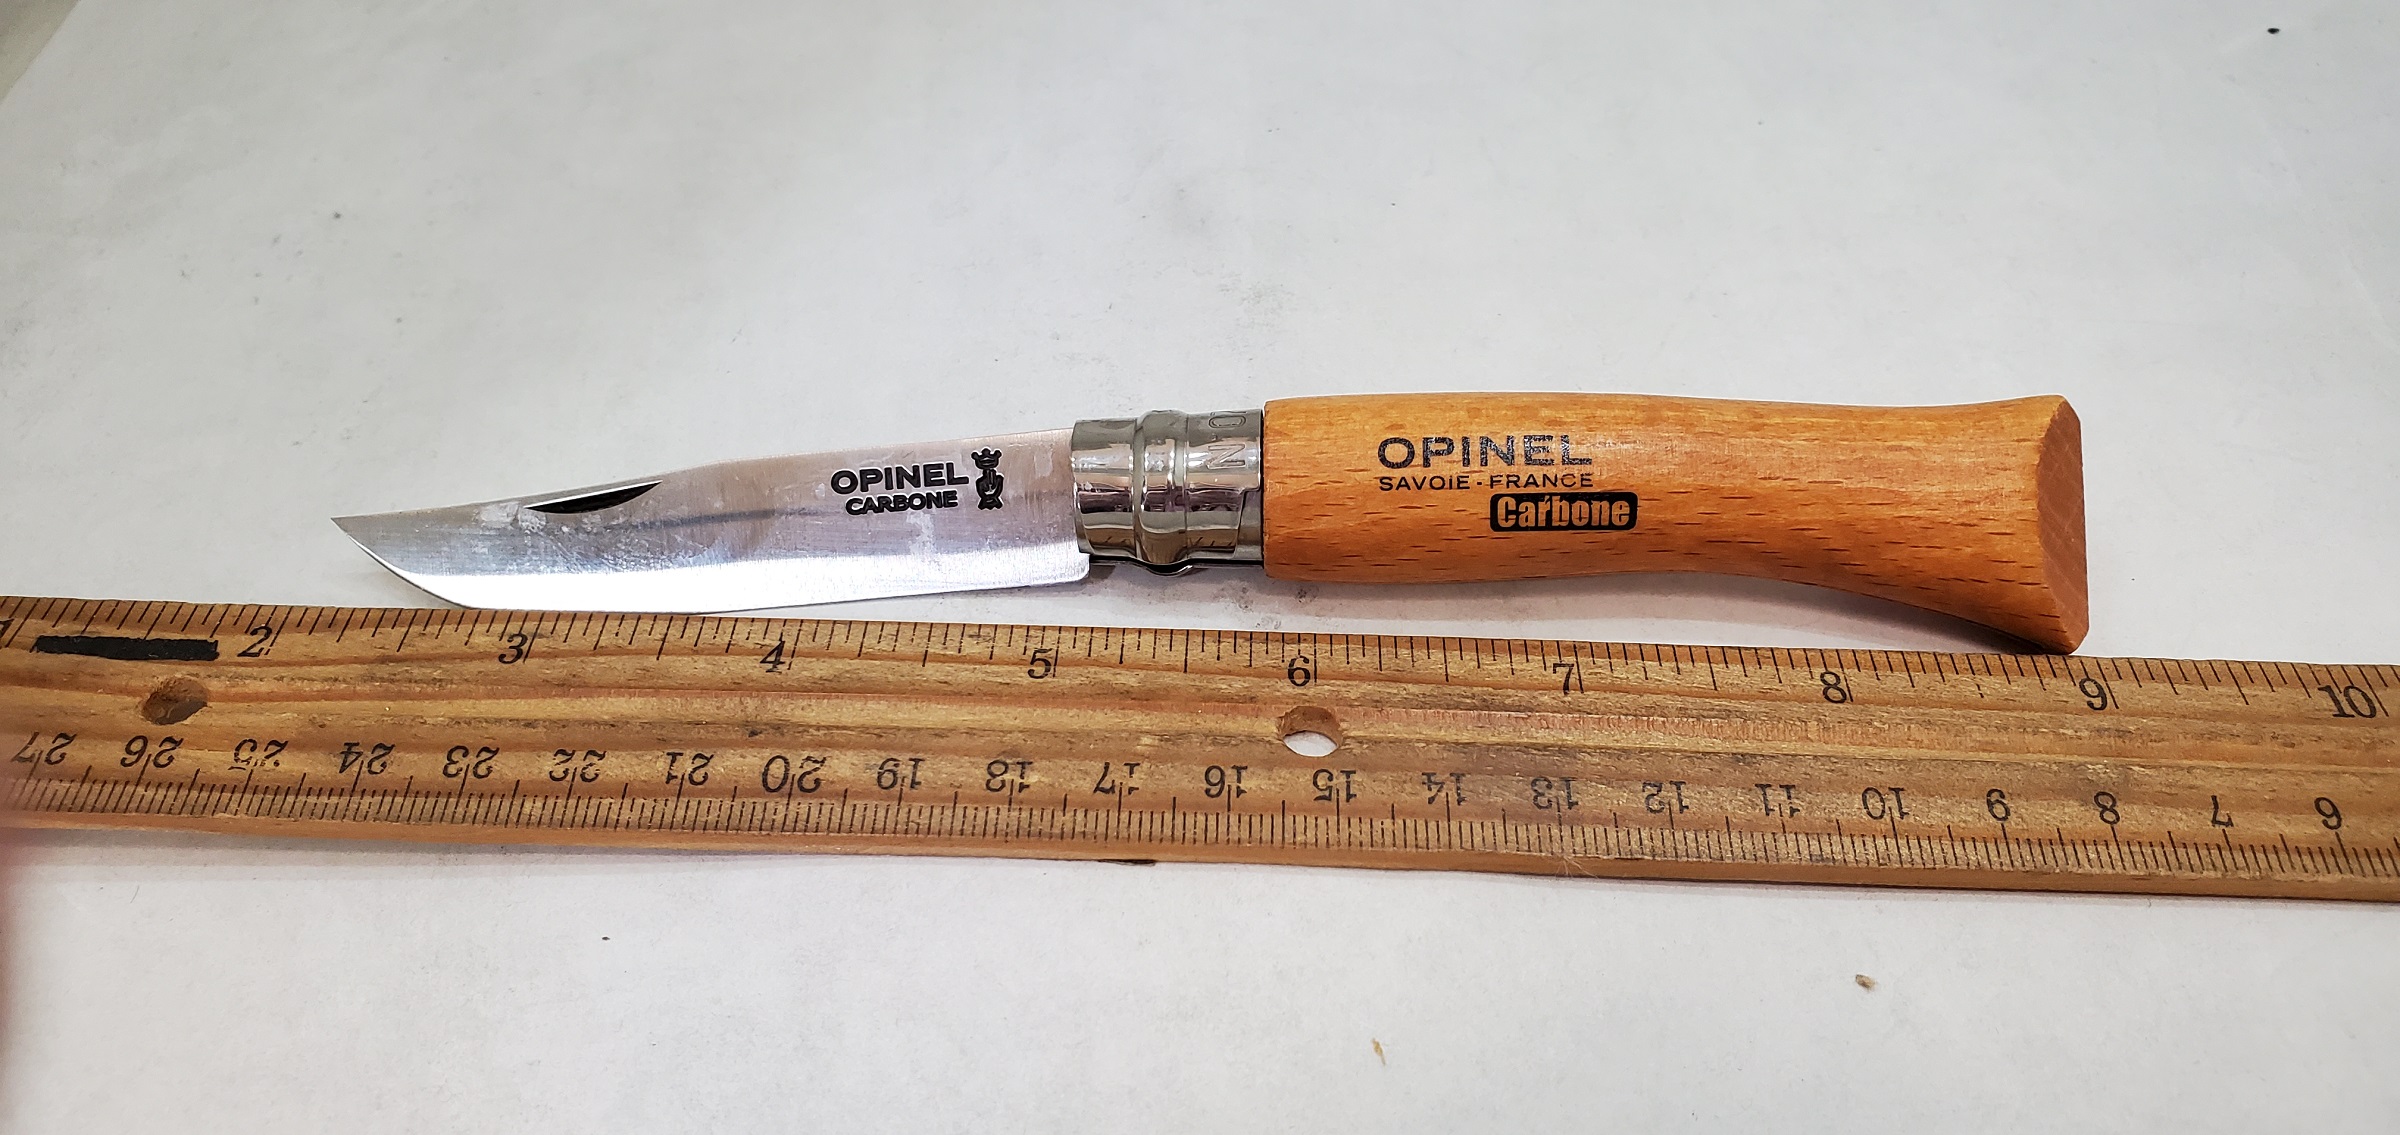 No. 7 Opinel Carbon Knife OP-13070 4 Inch